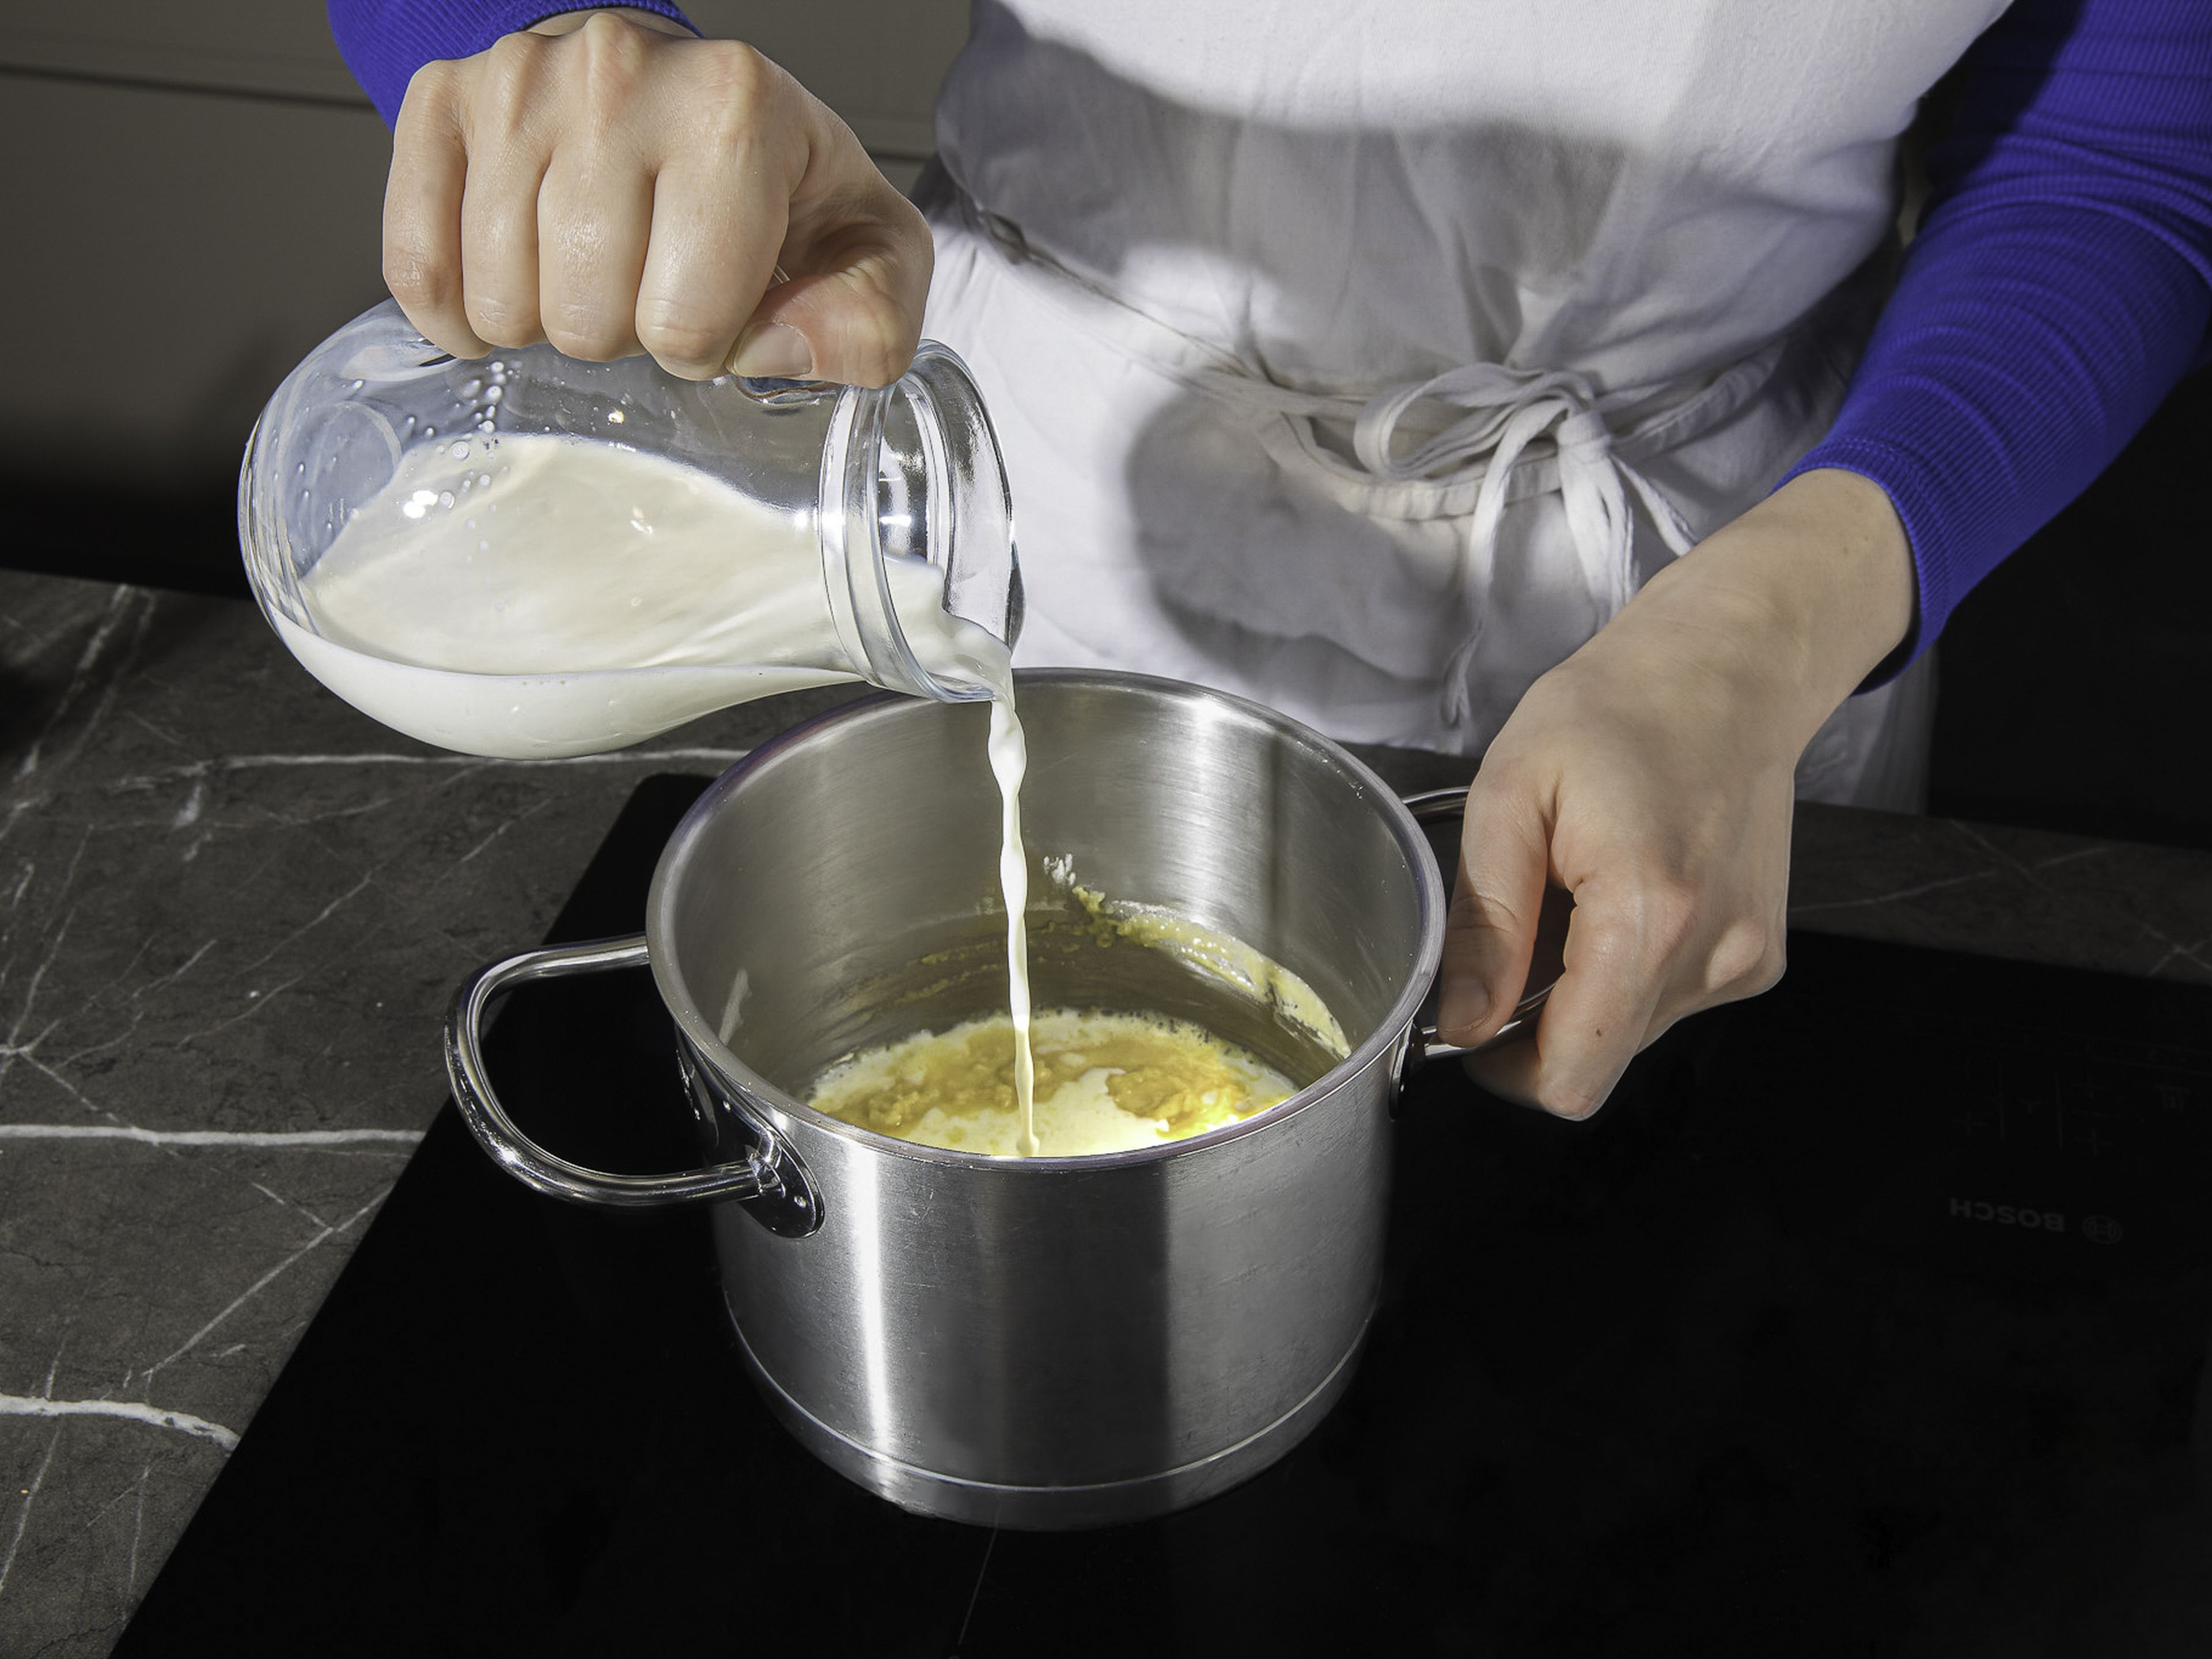 Preheat the oven to 190°C/375°F. Grate the Gruyère cheese. Melt the butter in a small saucepan and add the flour, quickly whisking together. Stir over medium heat for approx. 2 min. until well combined. Add half of the milk and bring to a boil while stirring constantly. Let the béchamel sauce simmer for 2—3 min. until it thickens. Season with salt and pepper, and set aside.